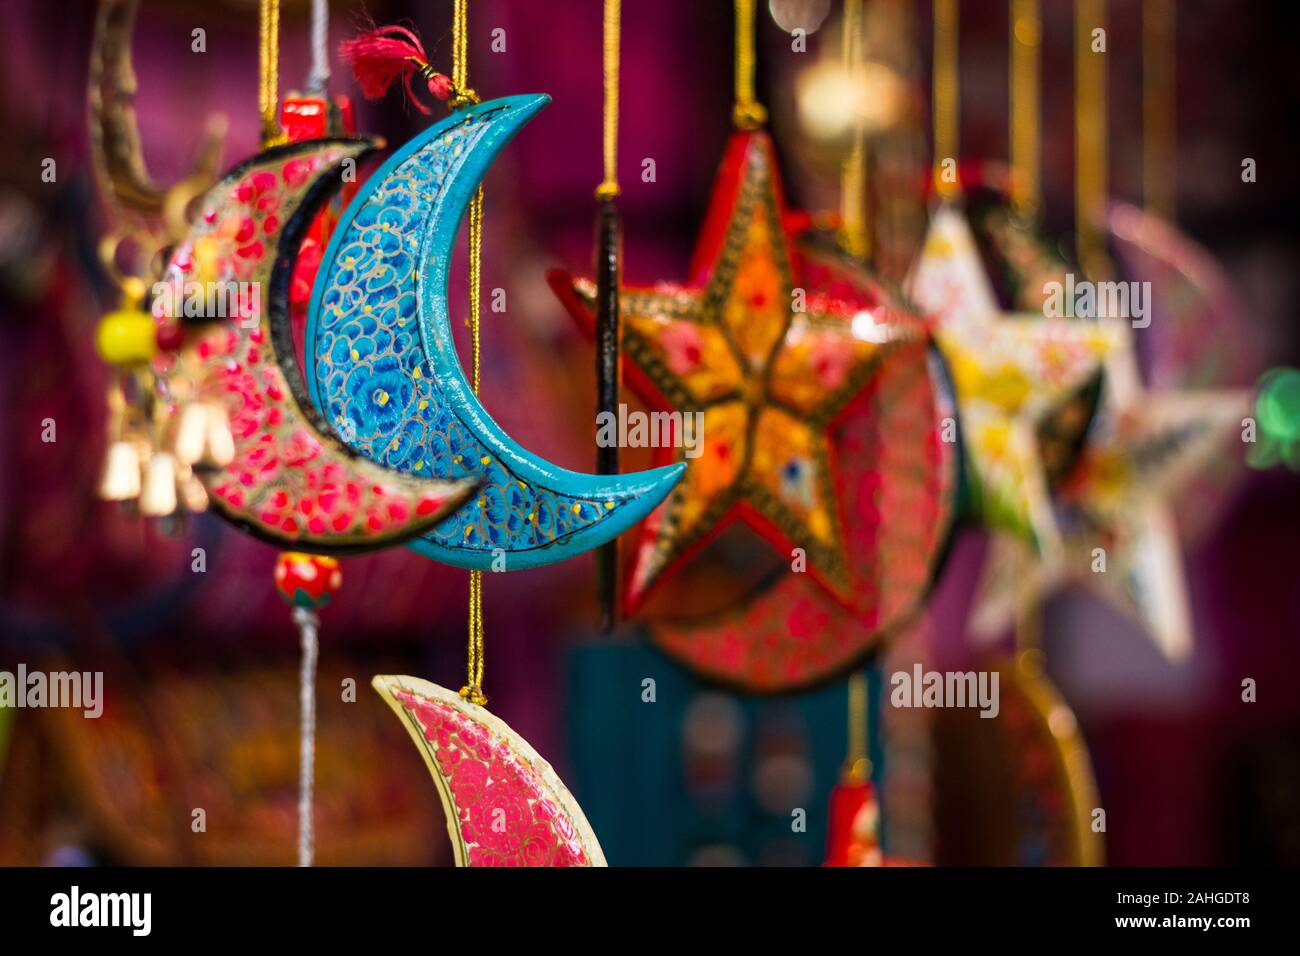 Colorful hanging ornaments including blue half moon on street market Stock Photo